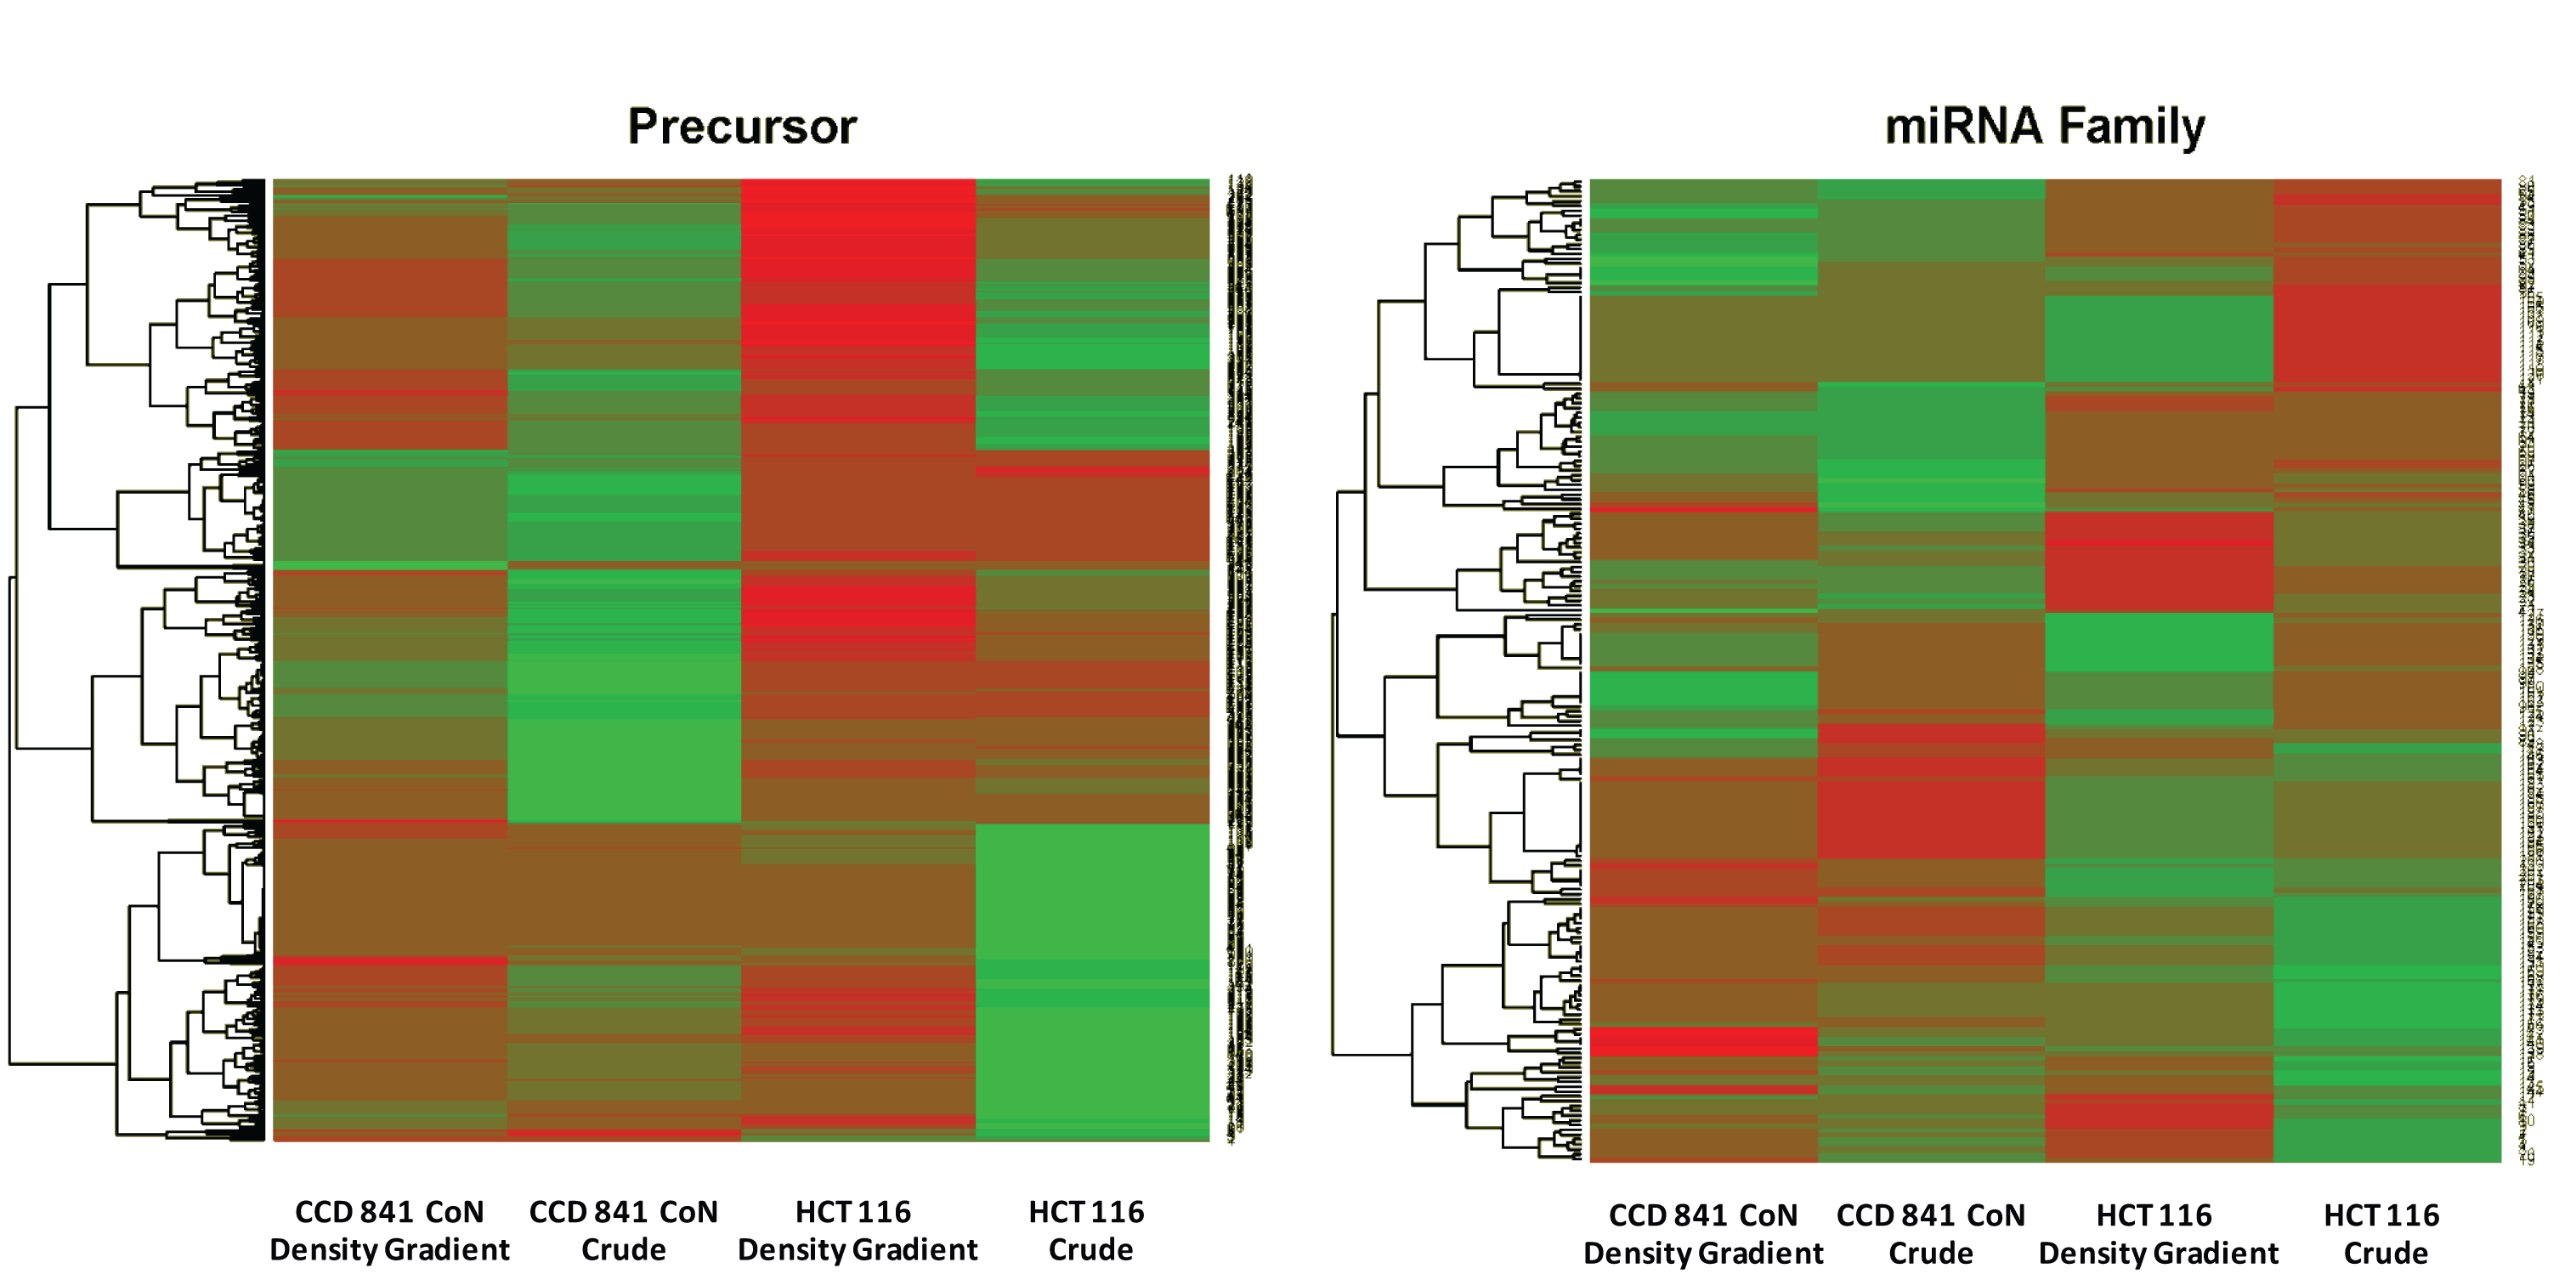 Figure 6. Differential expression heat-map of preparation method within a single cell line. Both precursor miRNAs and mature miRNAs are plotted.